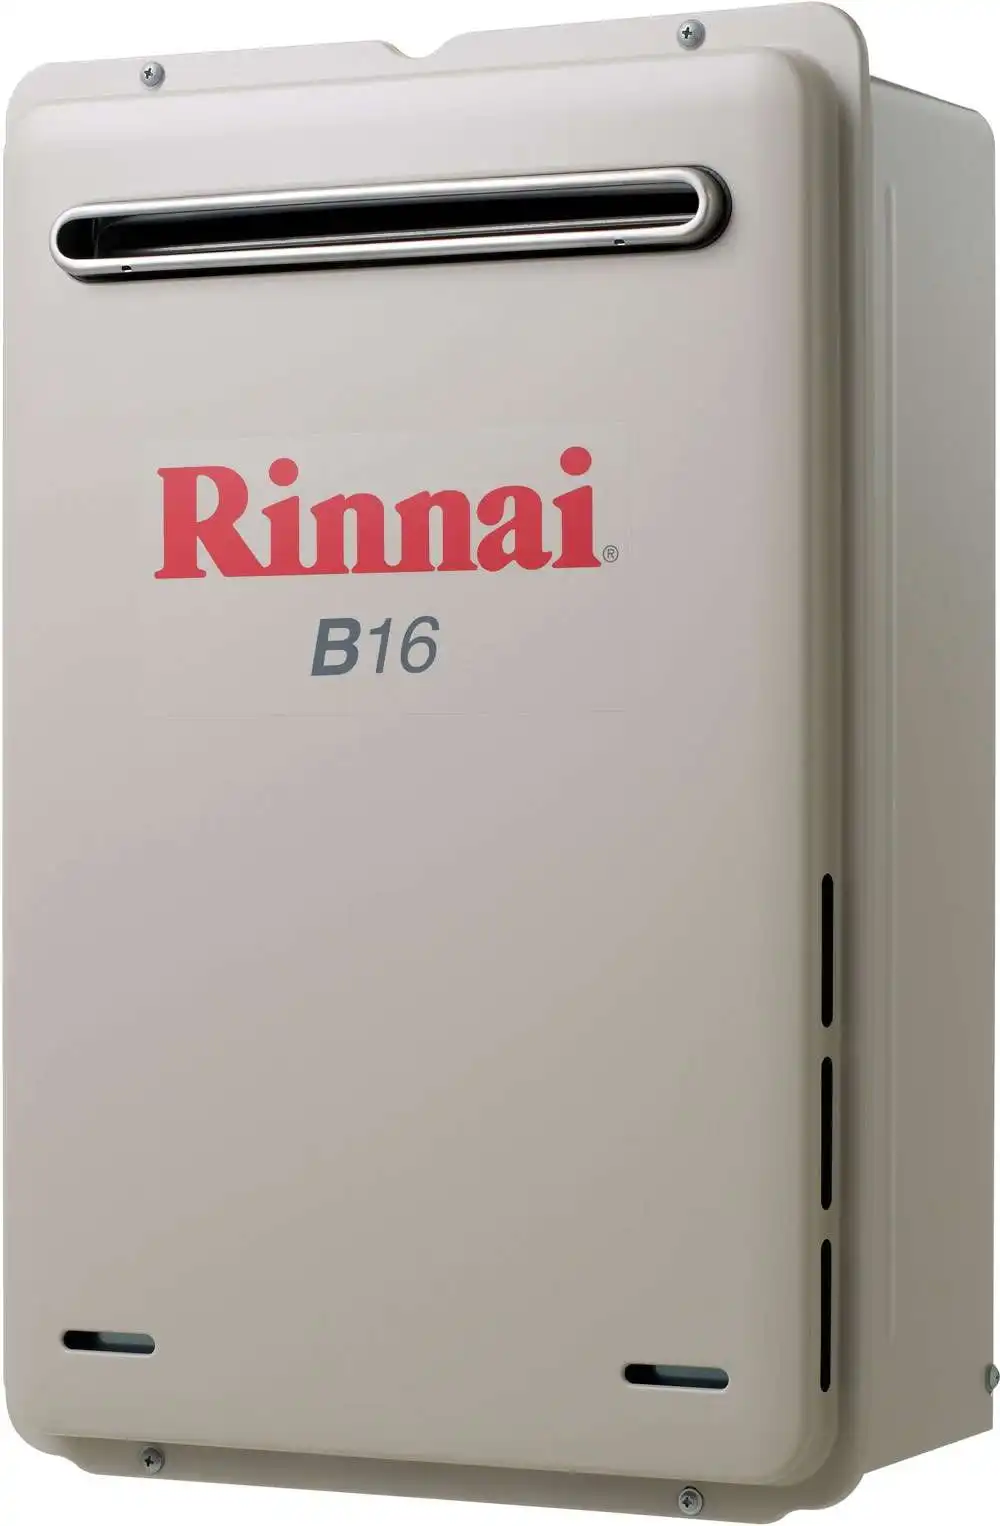 Rinnai Builders 60oC 16L Instant Hot Water System B16N60A B16 *NATURAL GAS*